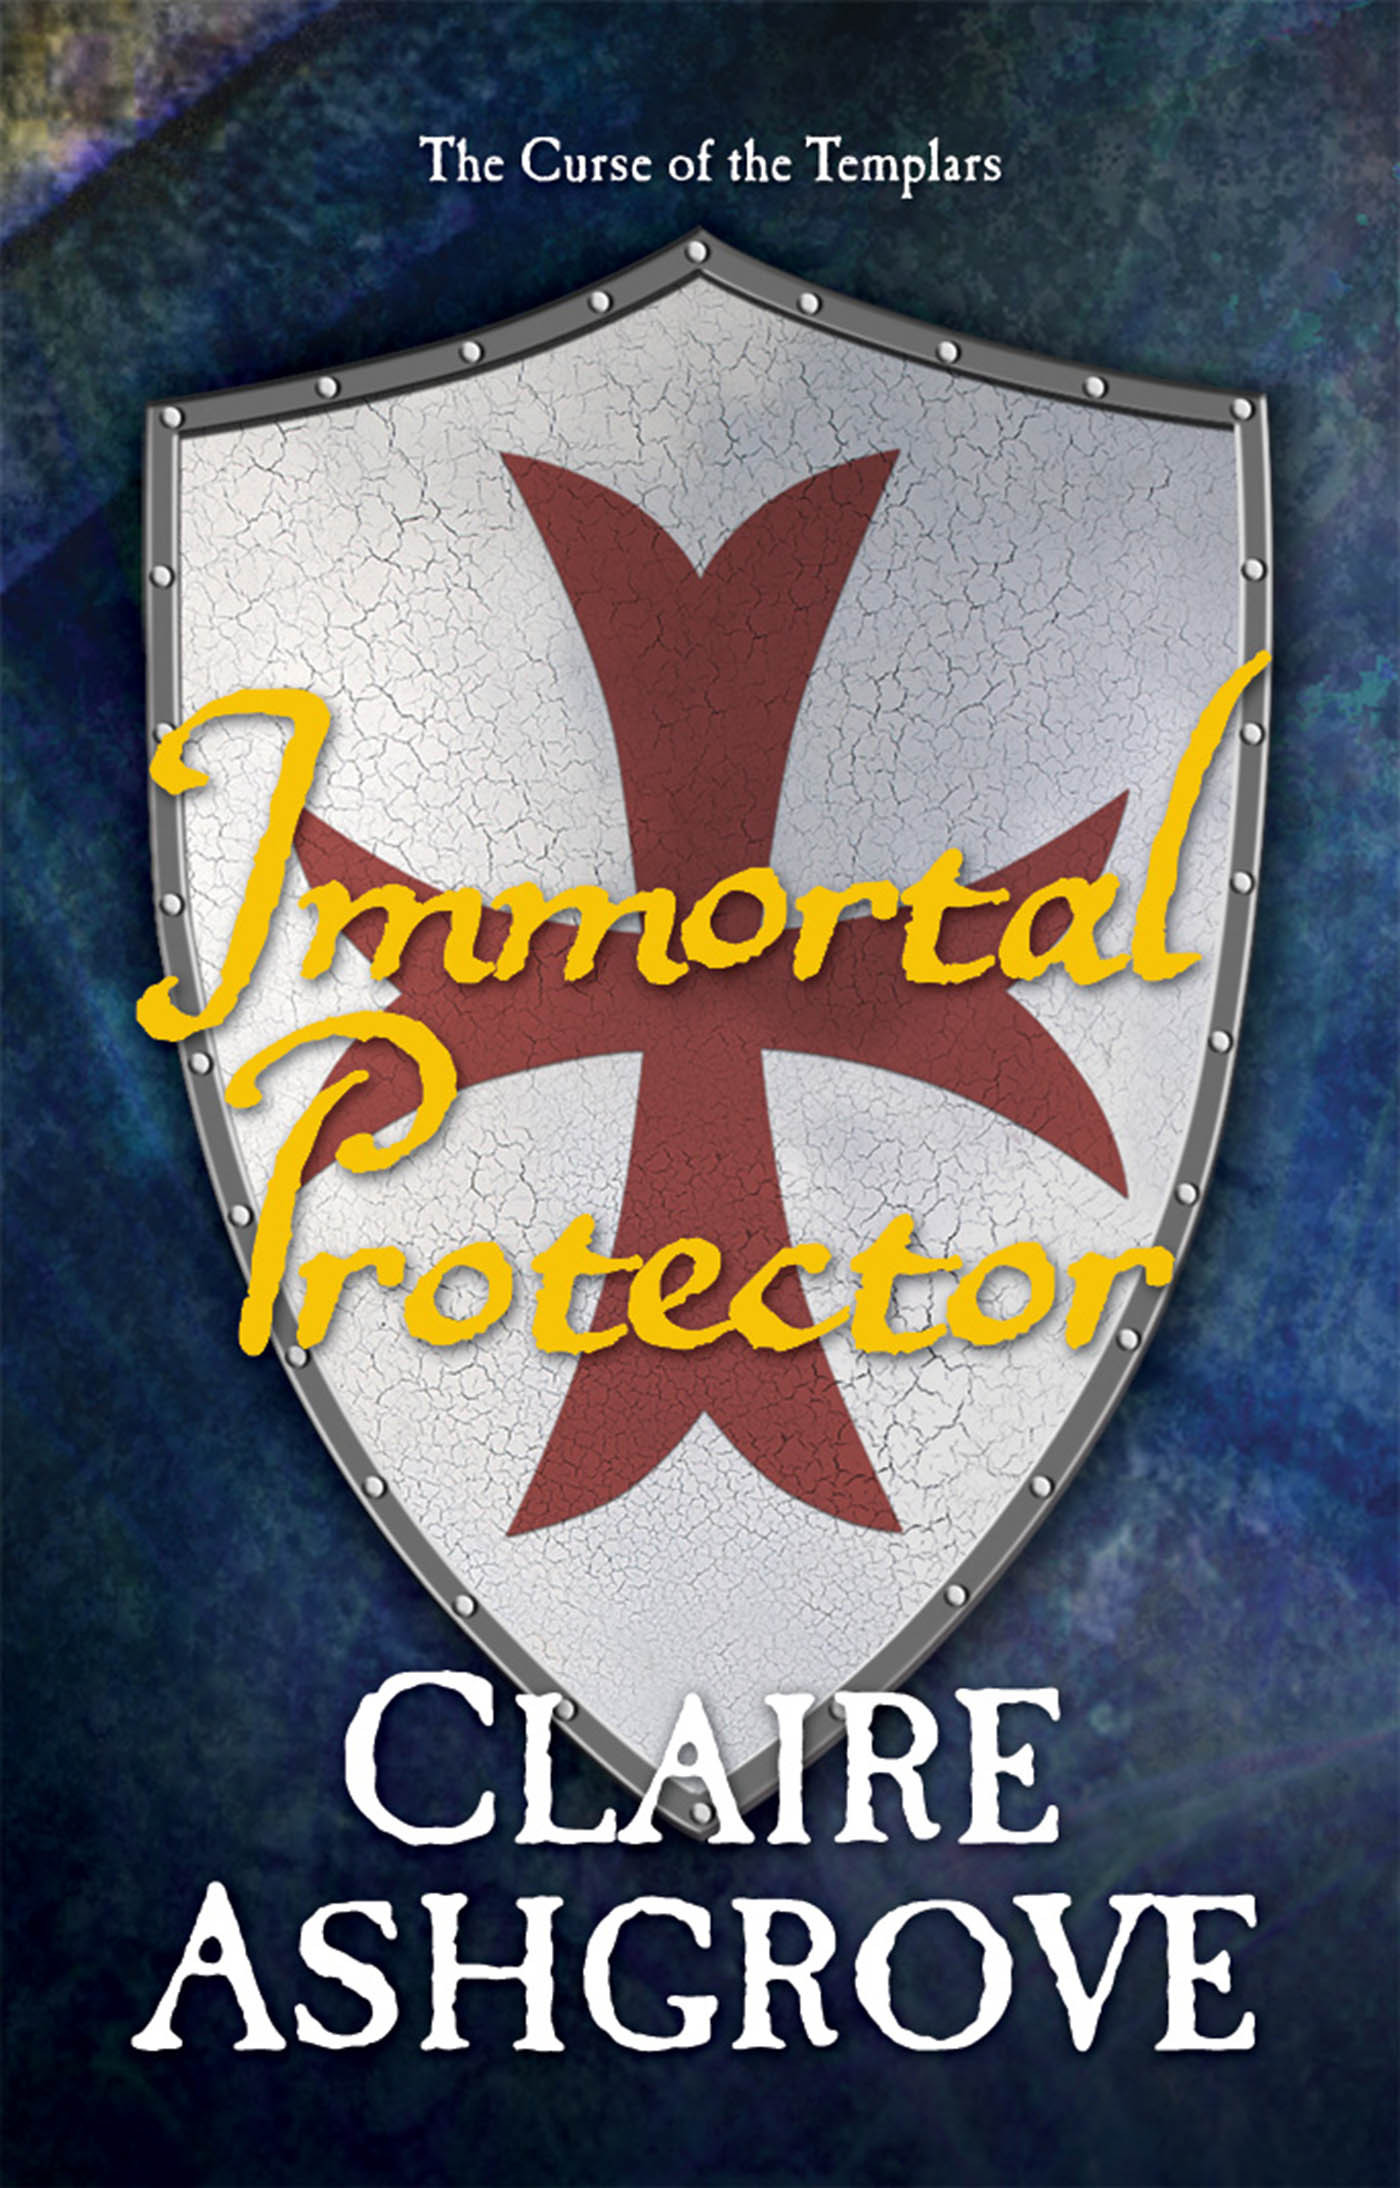 Immortal Protector : The Curse of the Templars by Claire Ashgrove